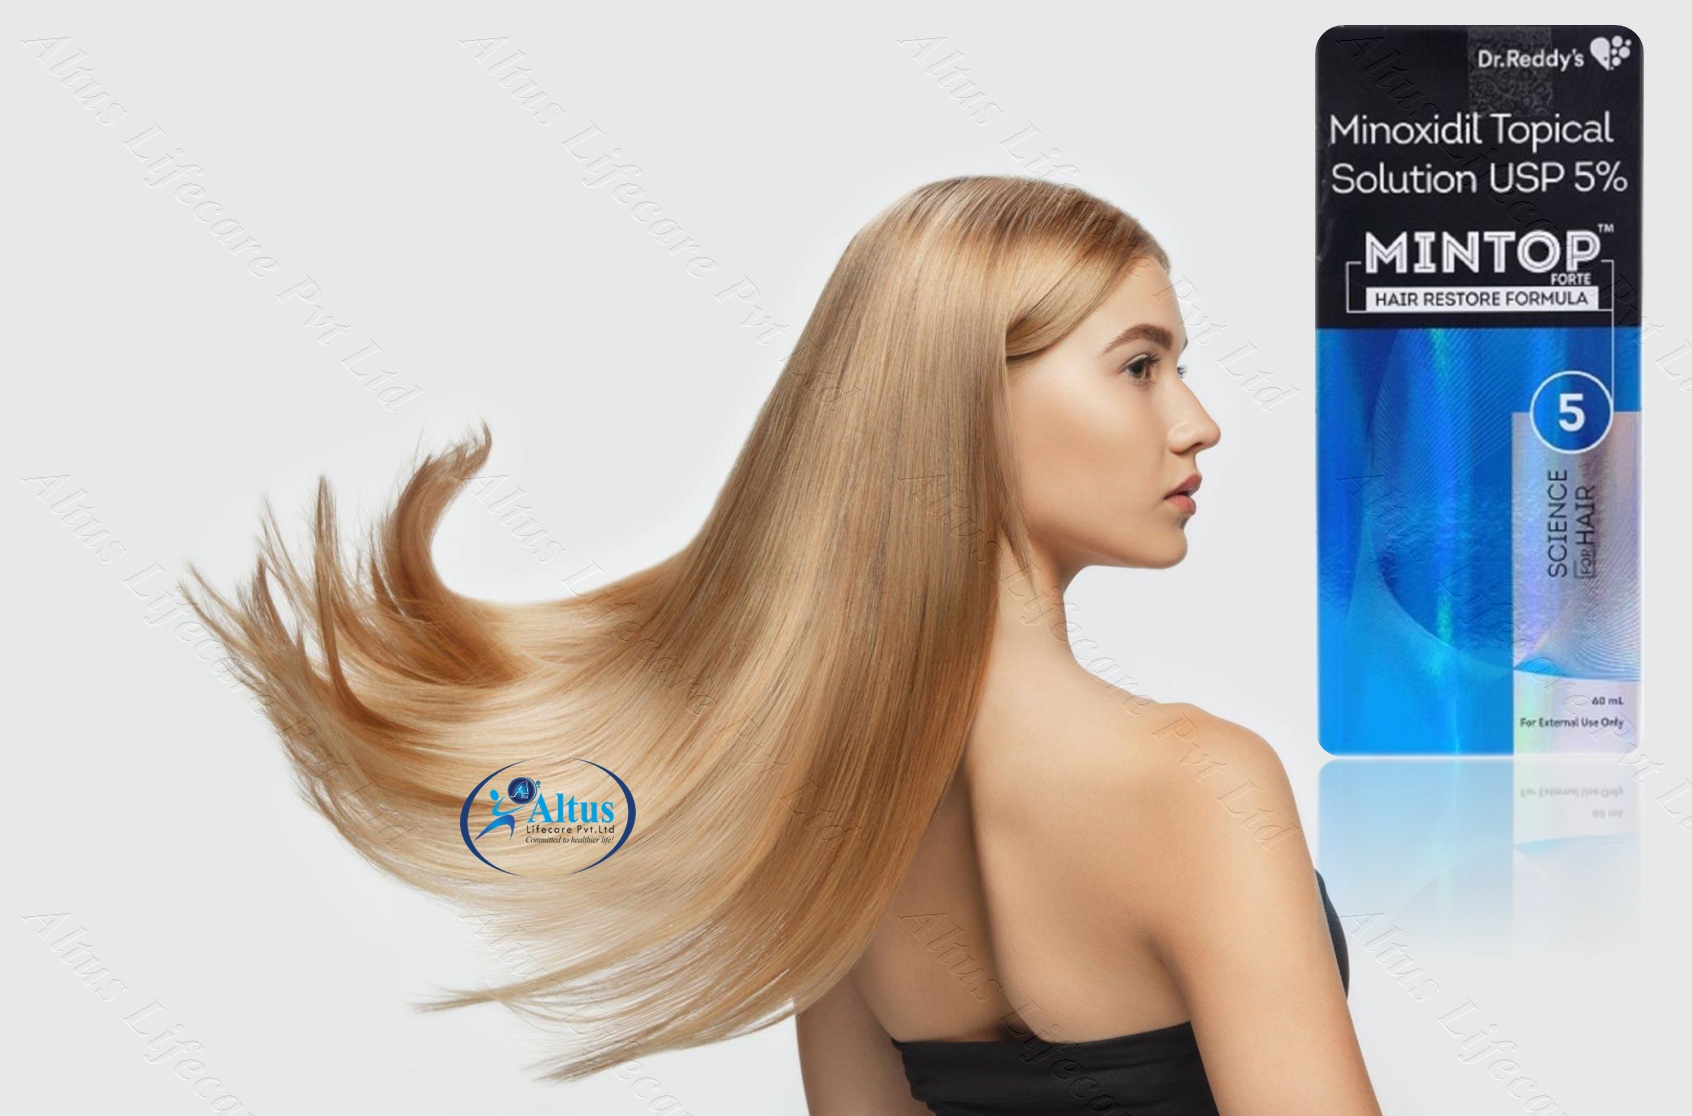 Mintop: The Secret to Thicker Hair? You Won’t Believe the Results!